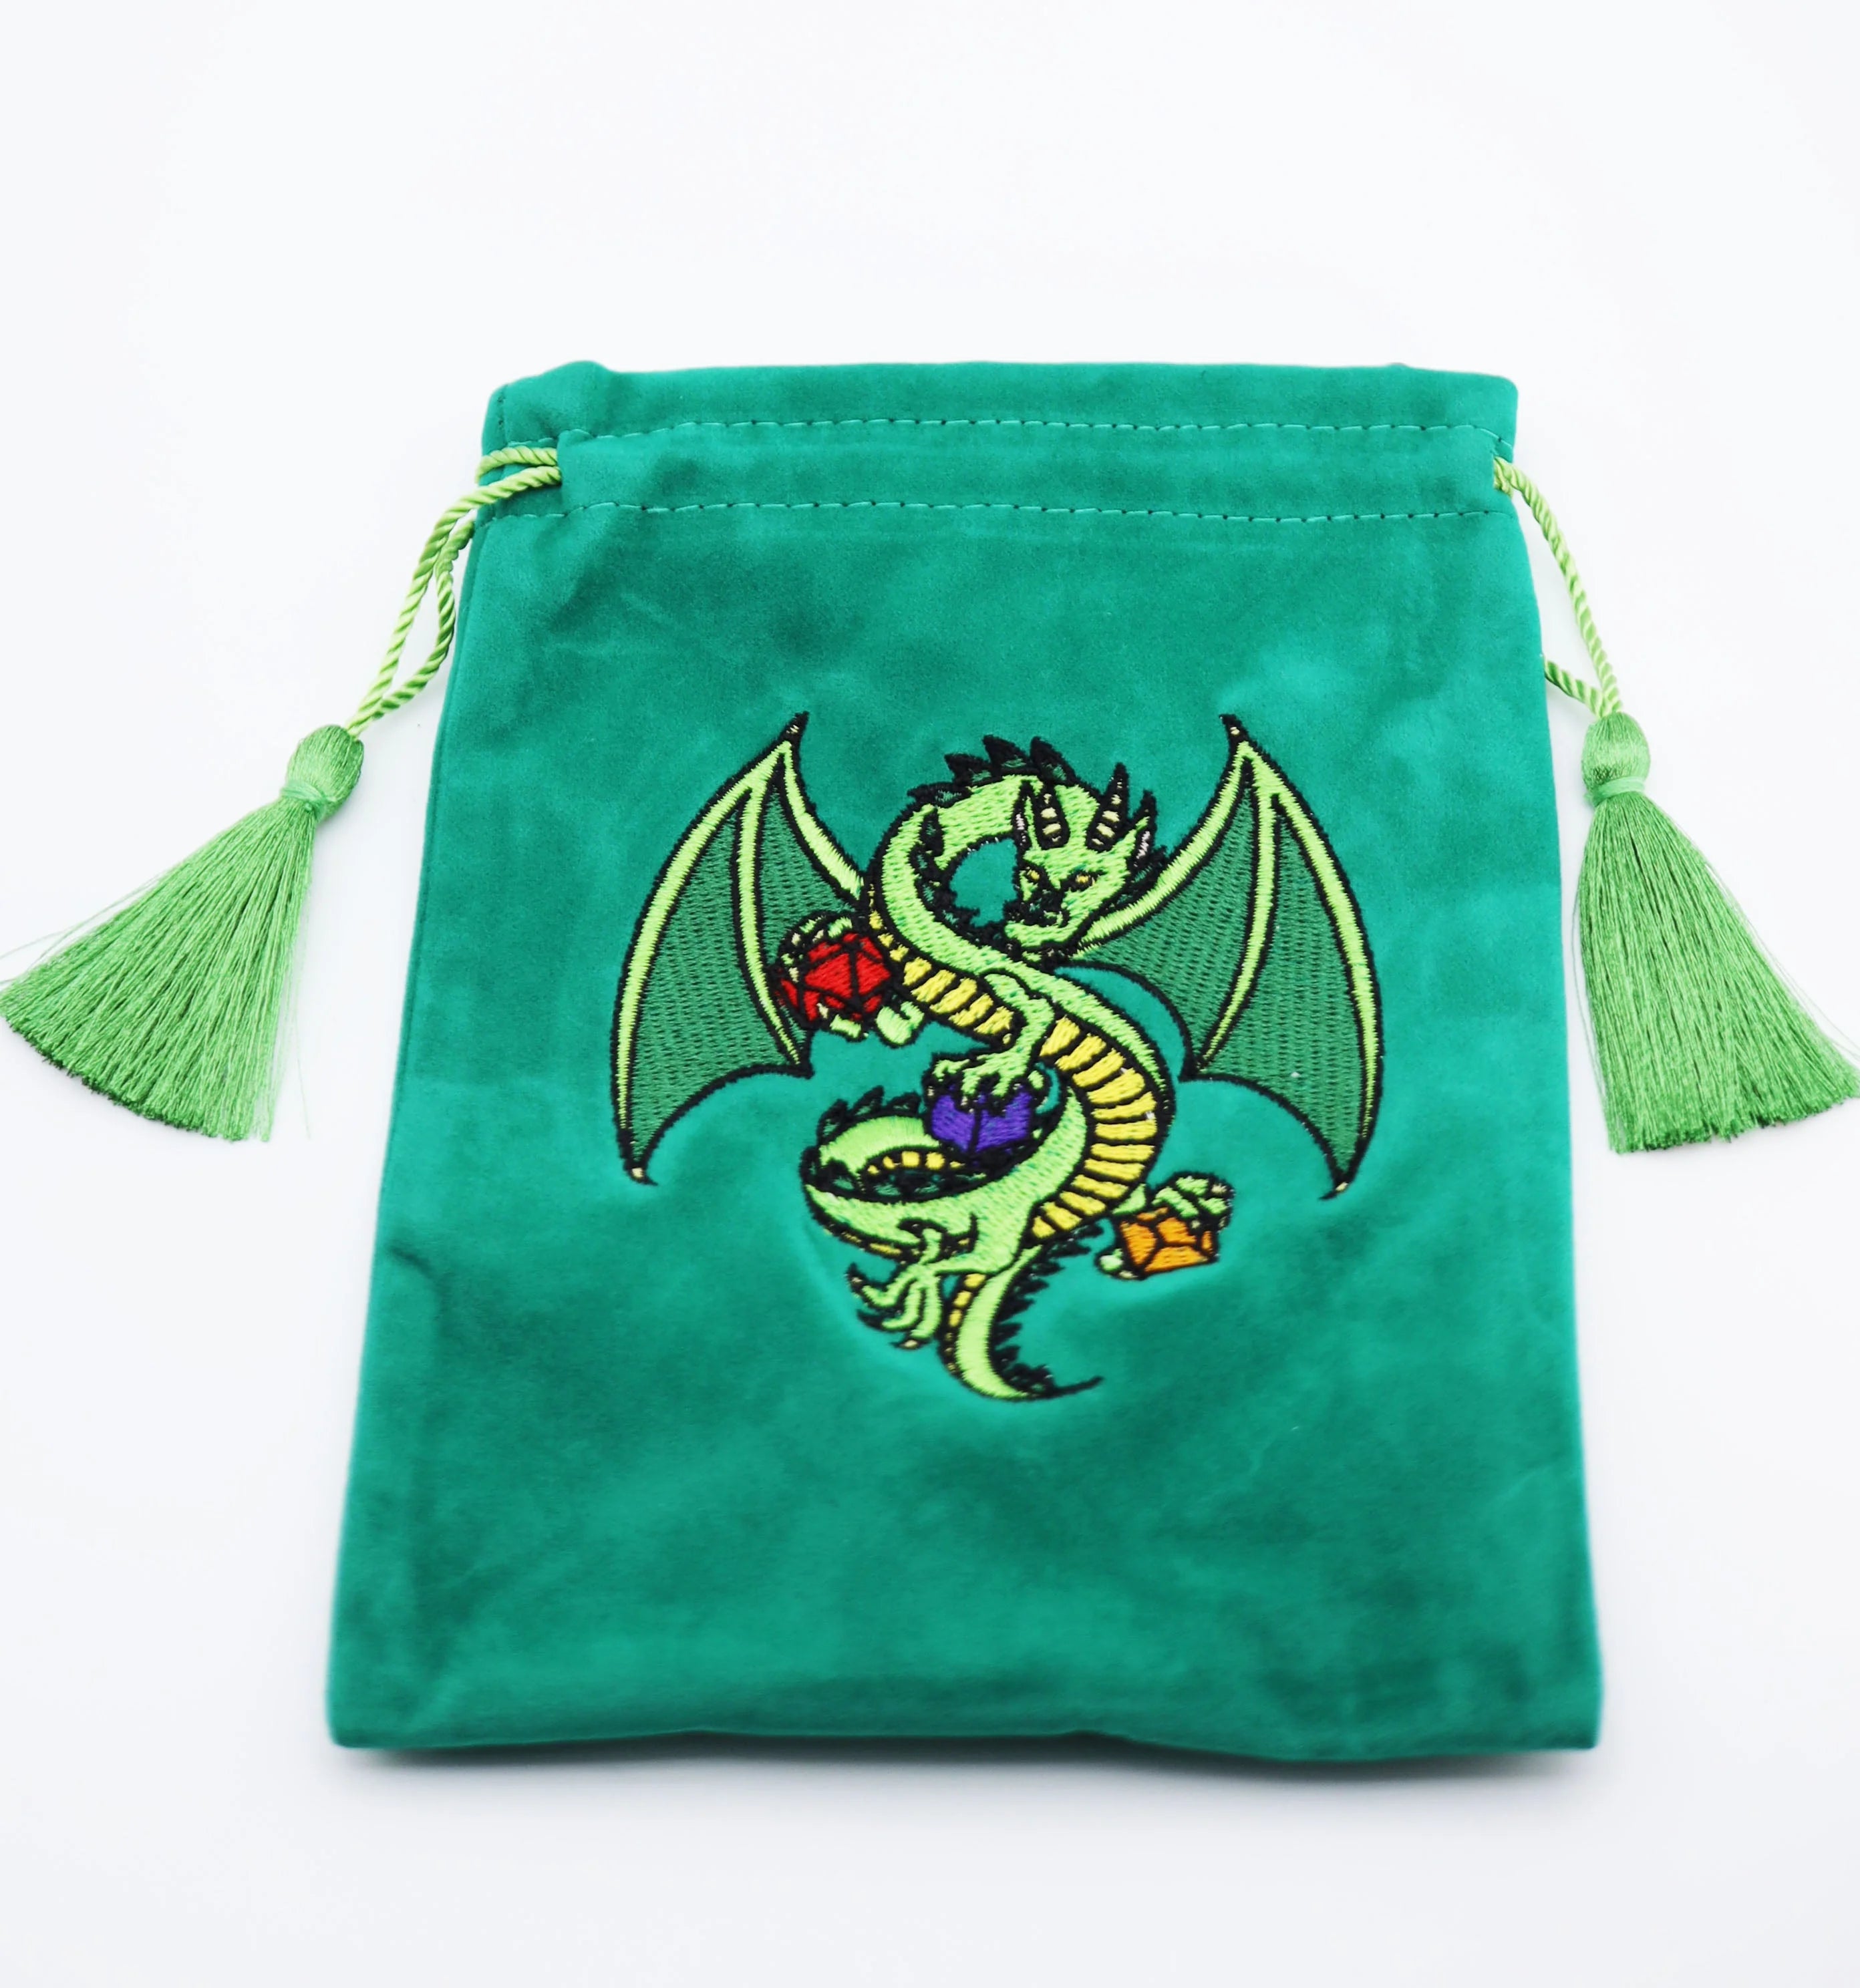 DICE BAG - GREEN DRAGON Dice & Counters Foam Brain Games    | Red Claw Gaming